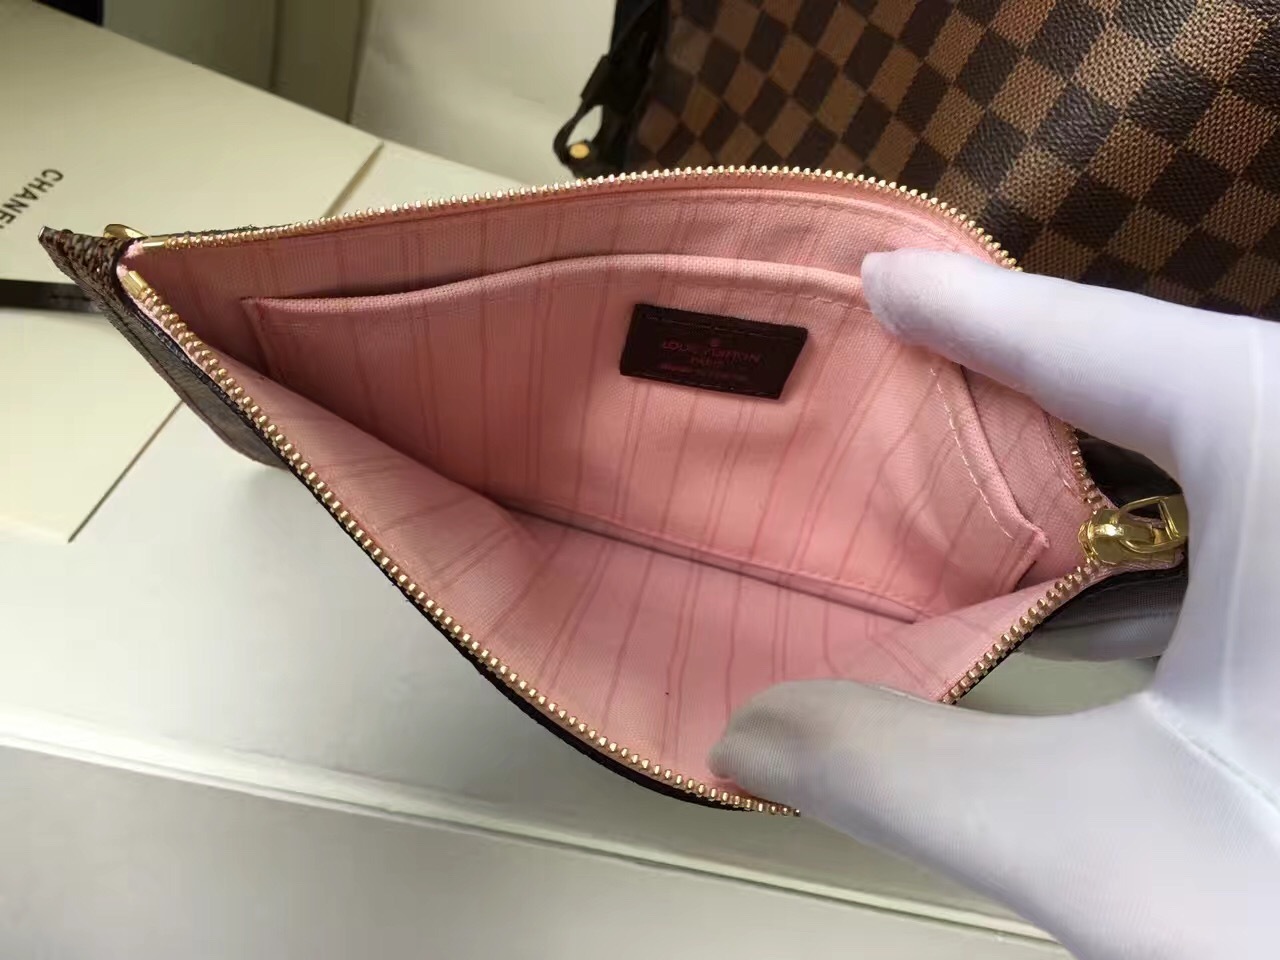 How To Tell If A Louis Vuitton Damier Neverfull Is Fake